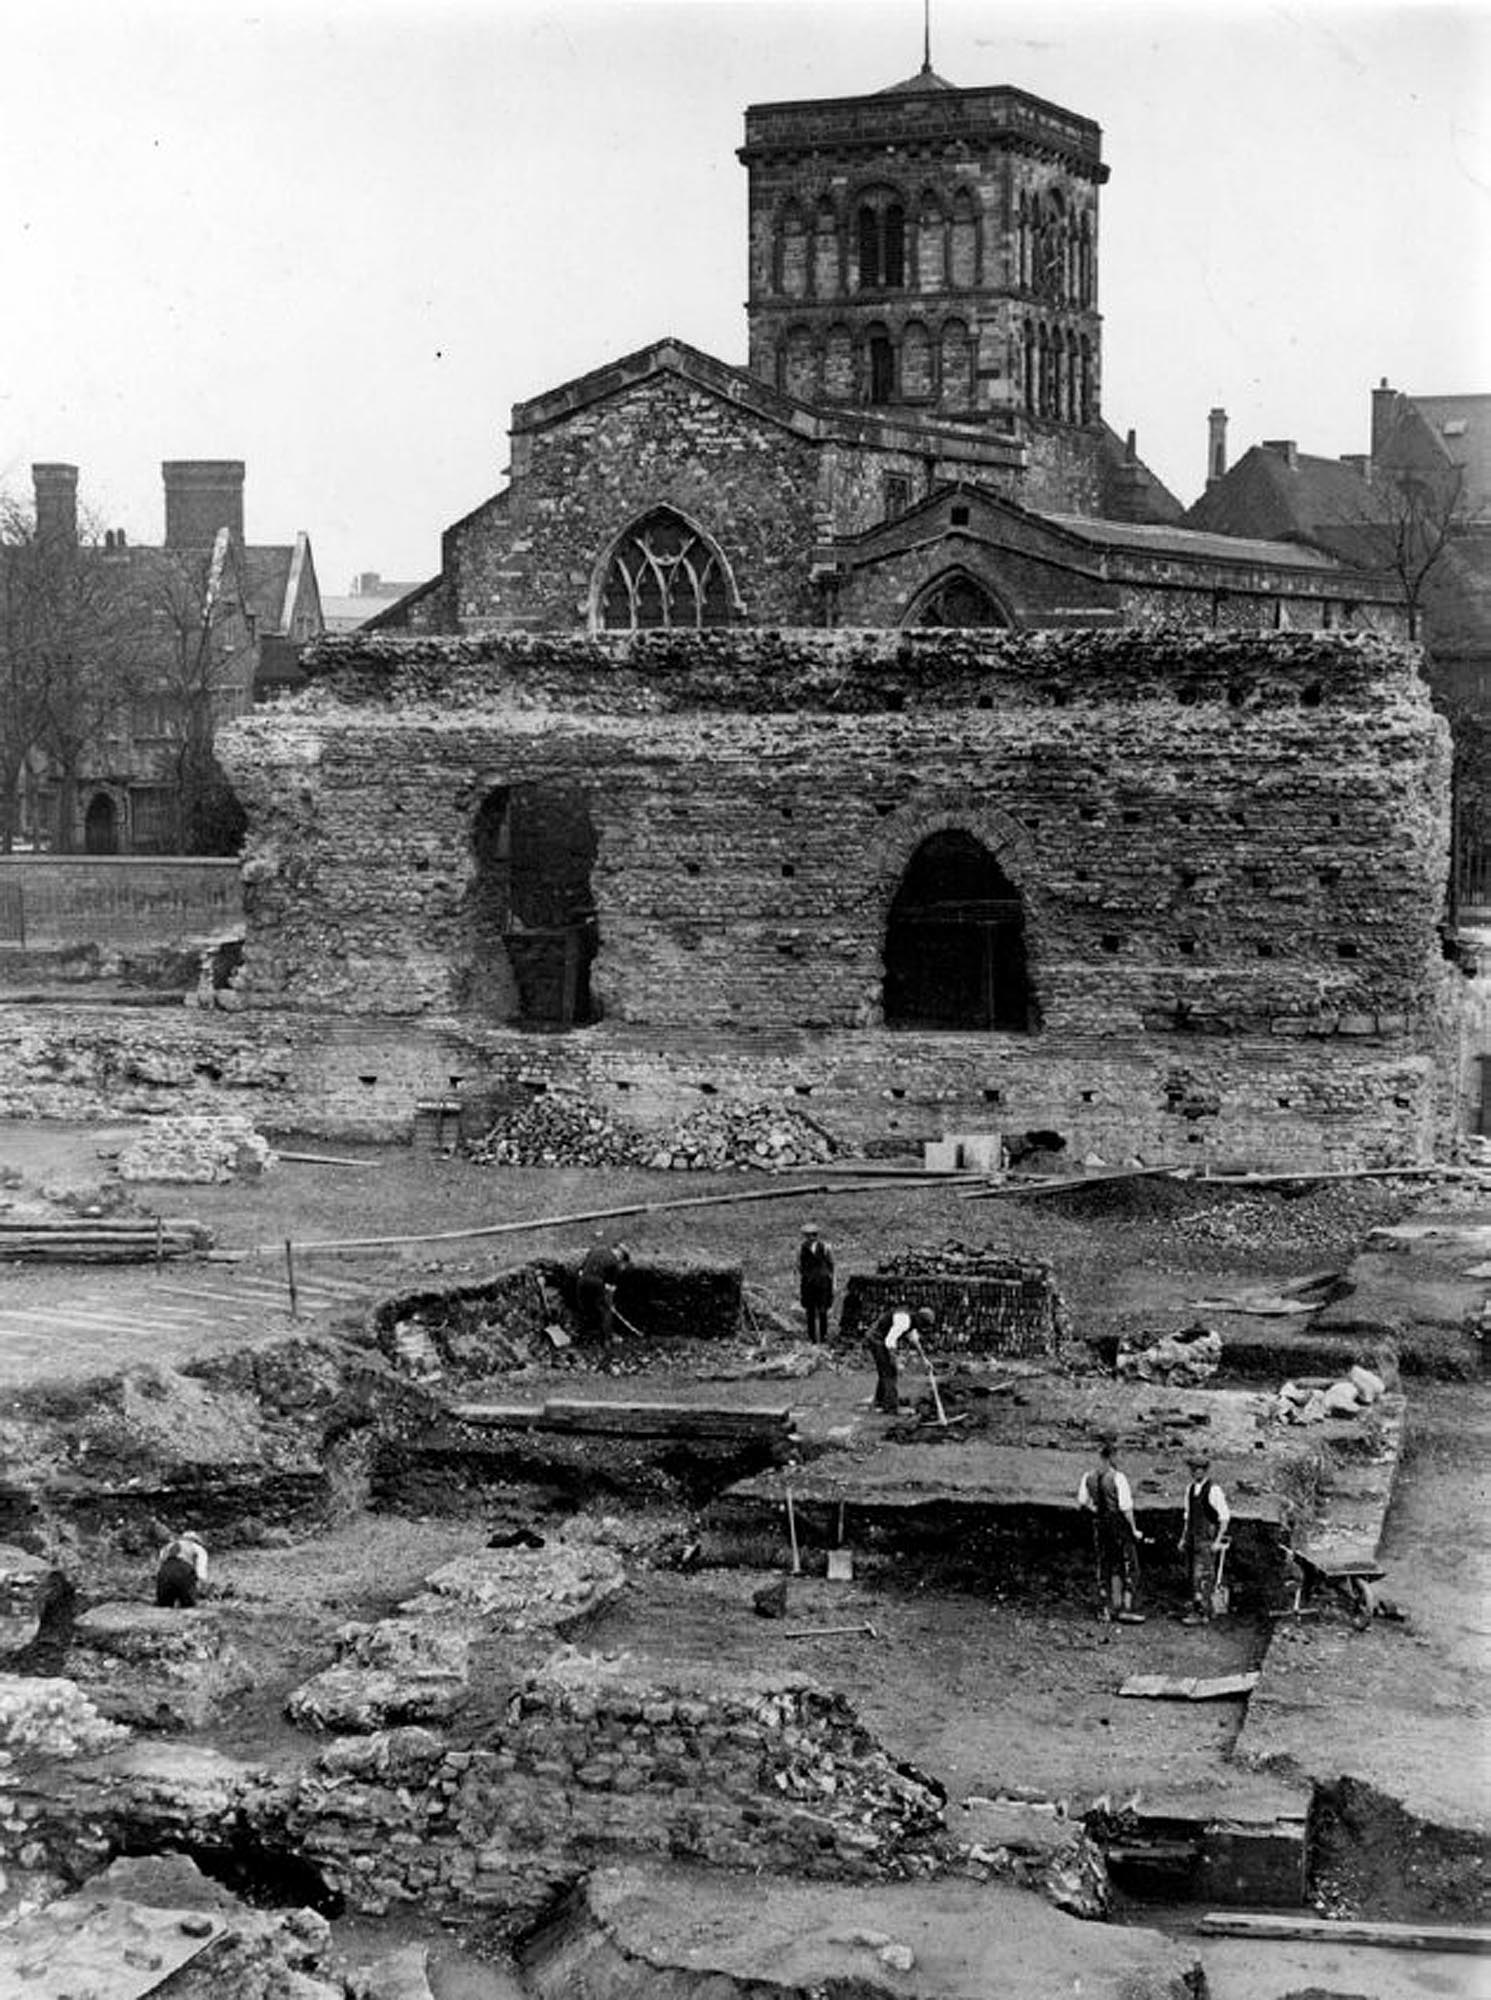 The excavation of the Jewry Wall Roman baths in the late 1930s - 